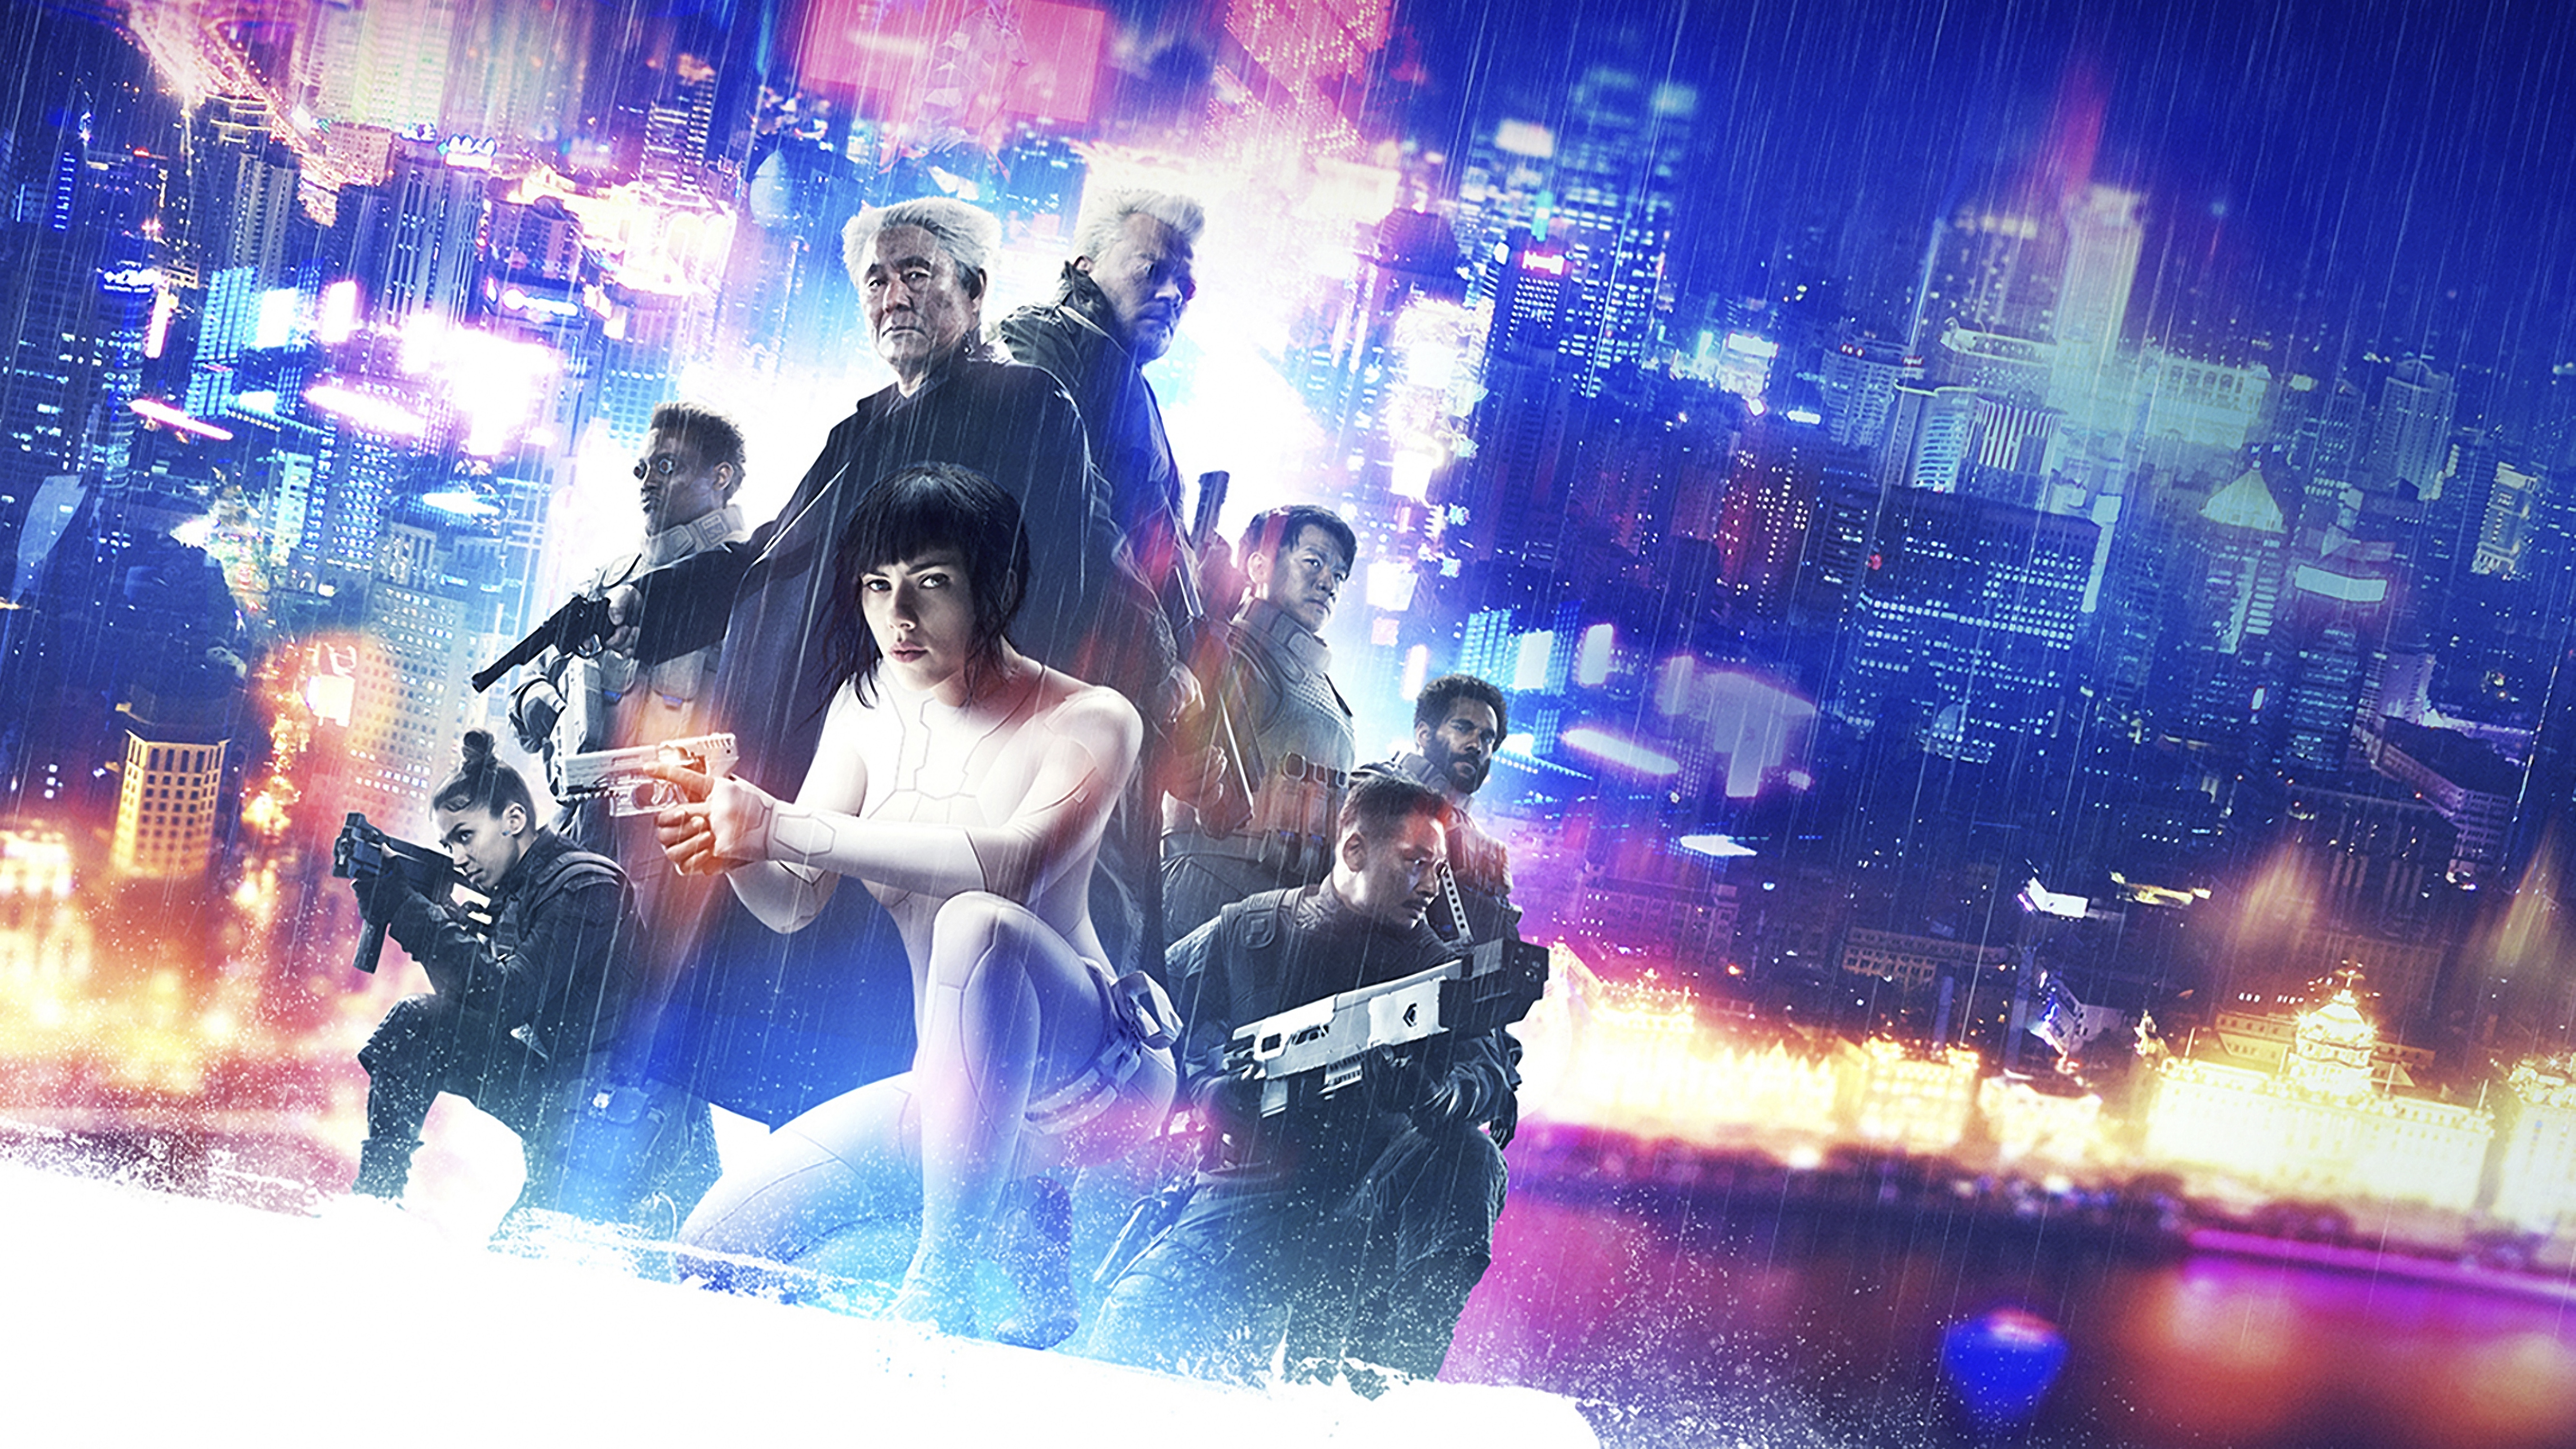 Movie Ghost in the Shell (2017) HD Wallpaper | Background Image